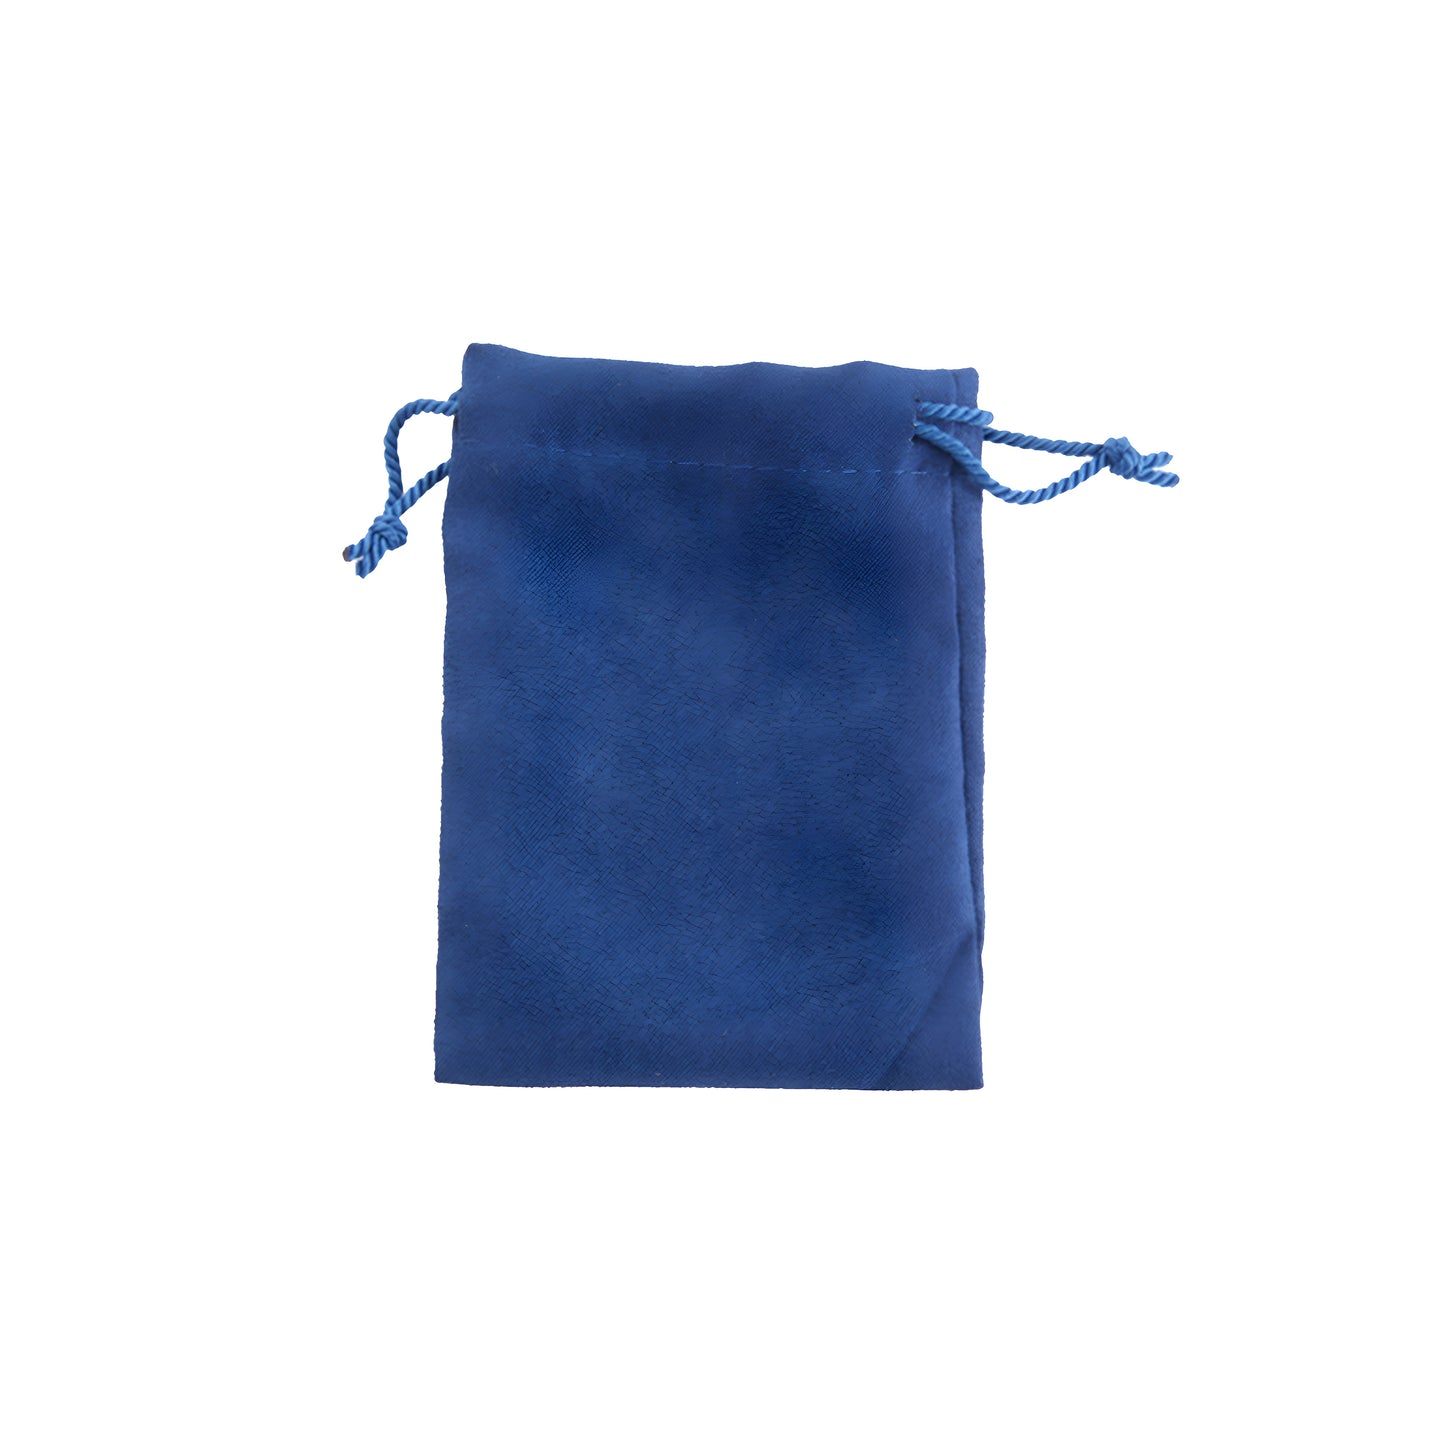 Recycled Suede Pouches (Packs of 10)